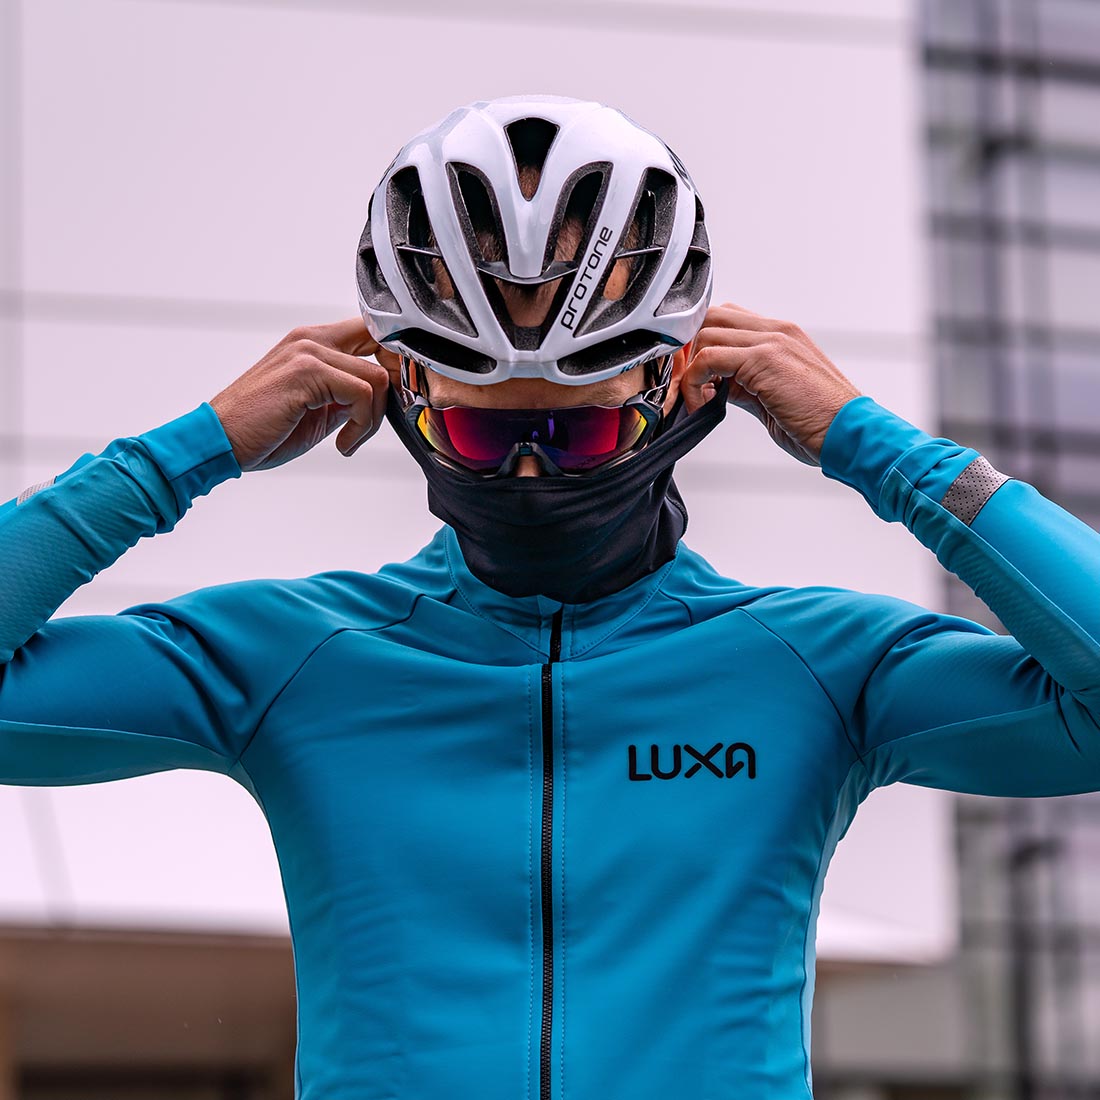 head and face warmers for road cyclists under helmet or to wear on neck